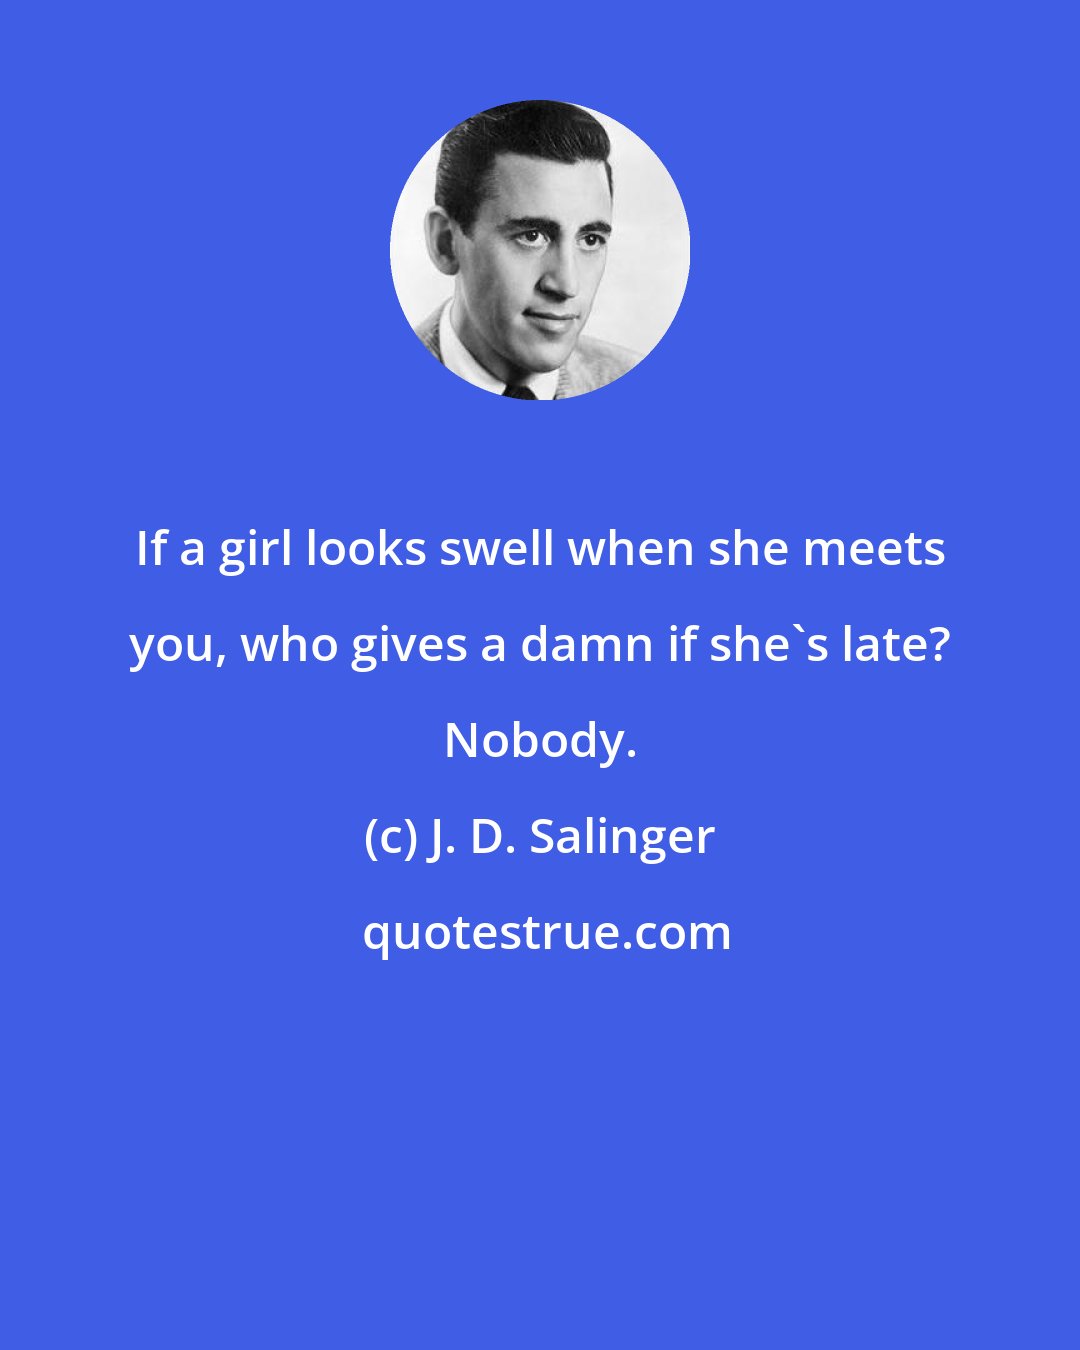 J. D. Salinger: If a girl looks swell when she meets you, who gives a damn if she's late? Nobody.